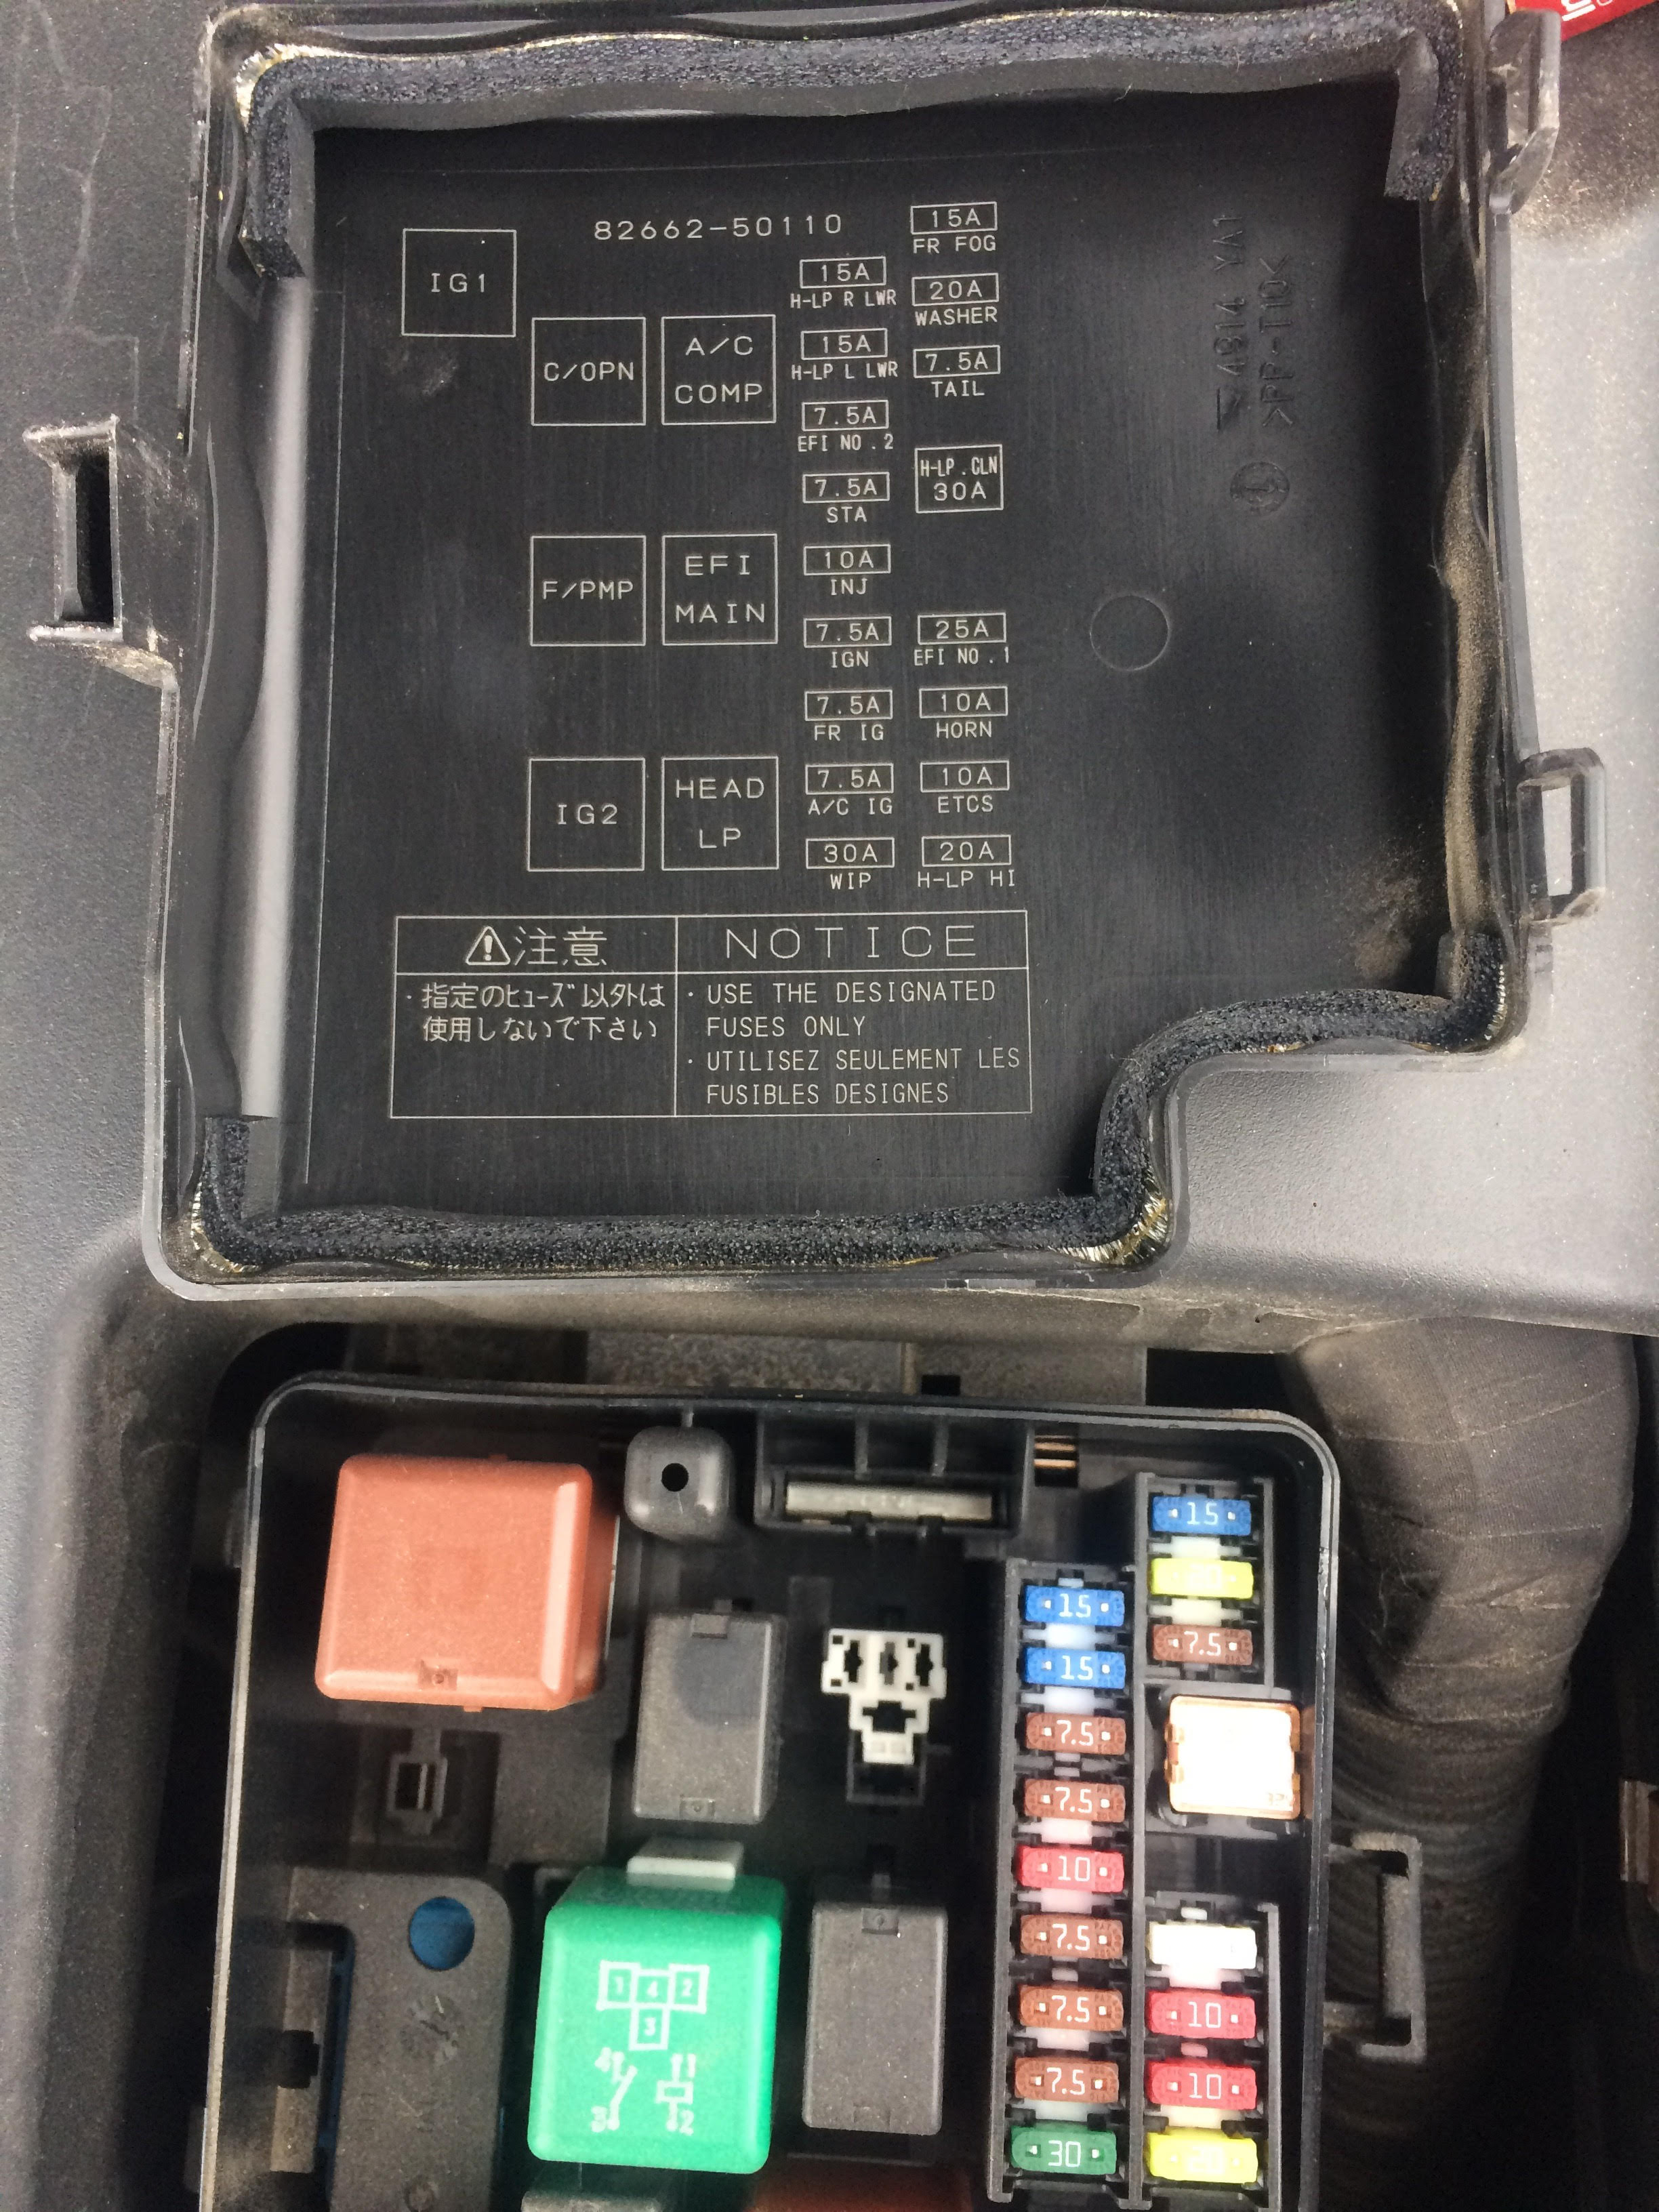 No relay in my AC COMP -in fuse box...??? - ClubLexus ... 2008 civic fuse box 